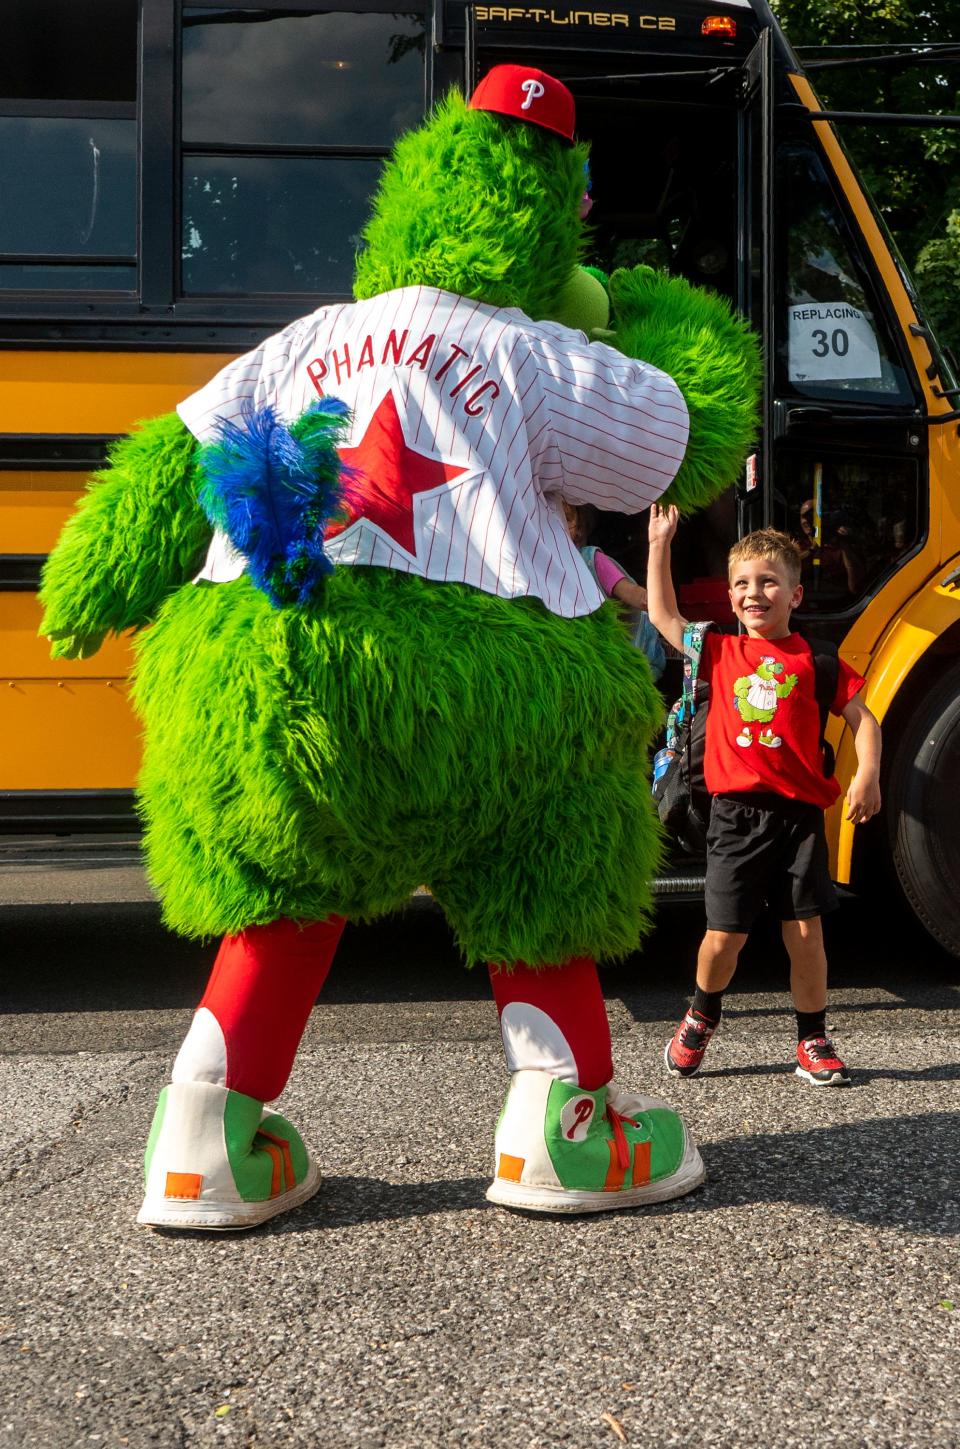 The Phillie Phanatic hi-fives Rowan Linder, a 5 year-old big-time baseball fan who is battling cancer, at his school bus stop before showing him his newly decorated Phillies-themed bedroom in Middletown on Thursday, Sept. 7, 2023.

[Daniella Heminghaus | Bucks County Courier Times]